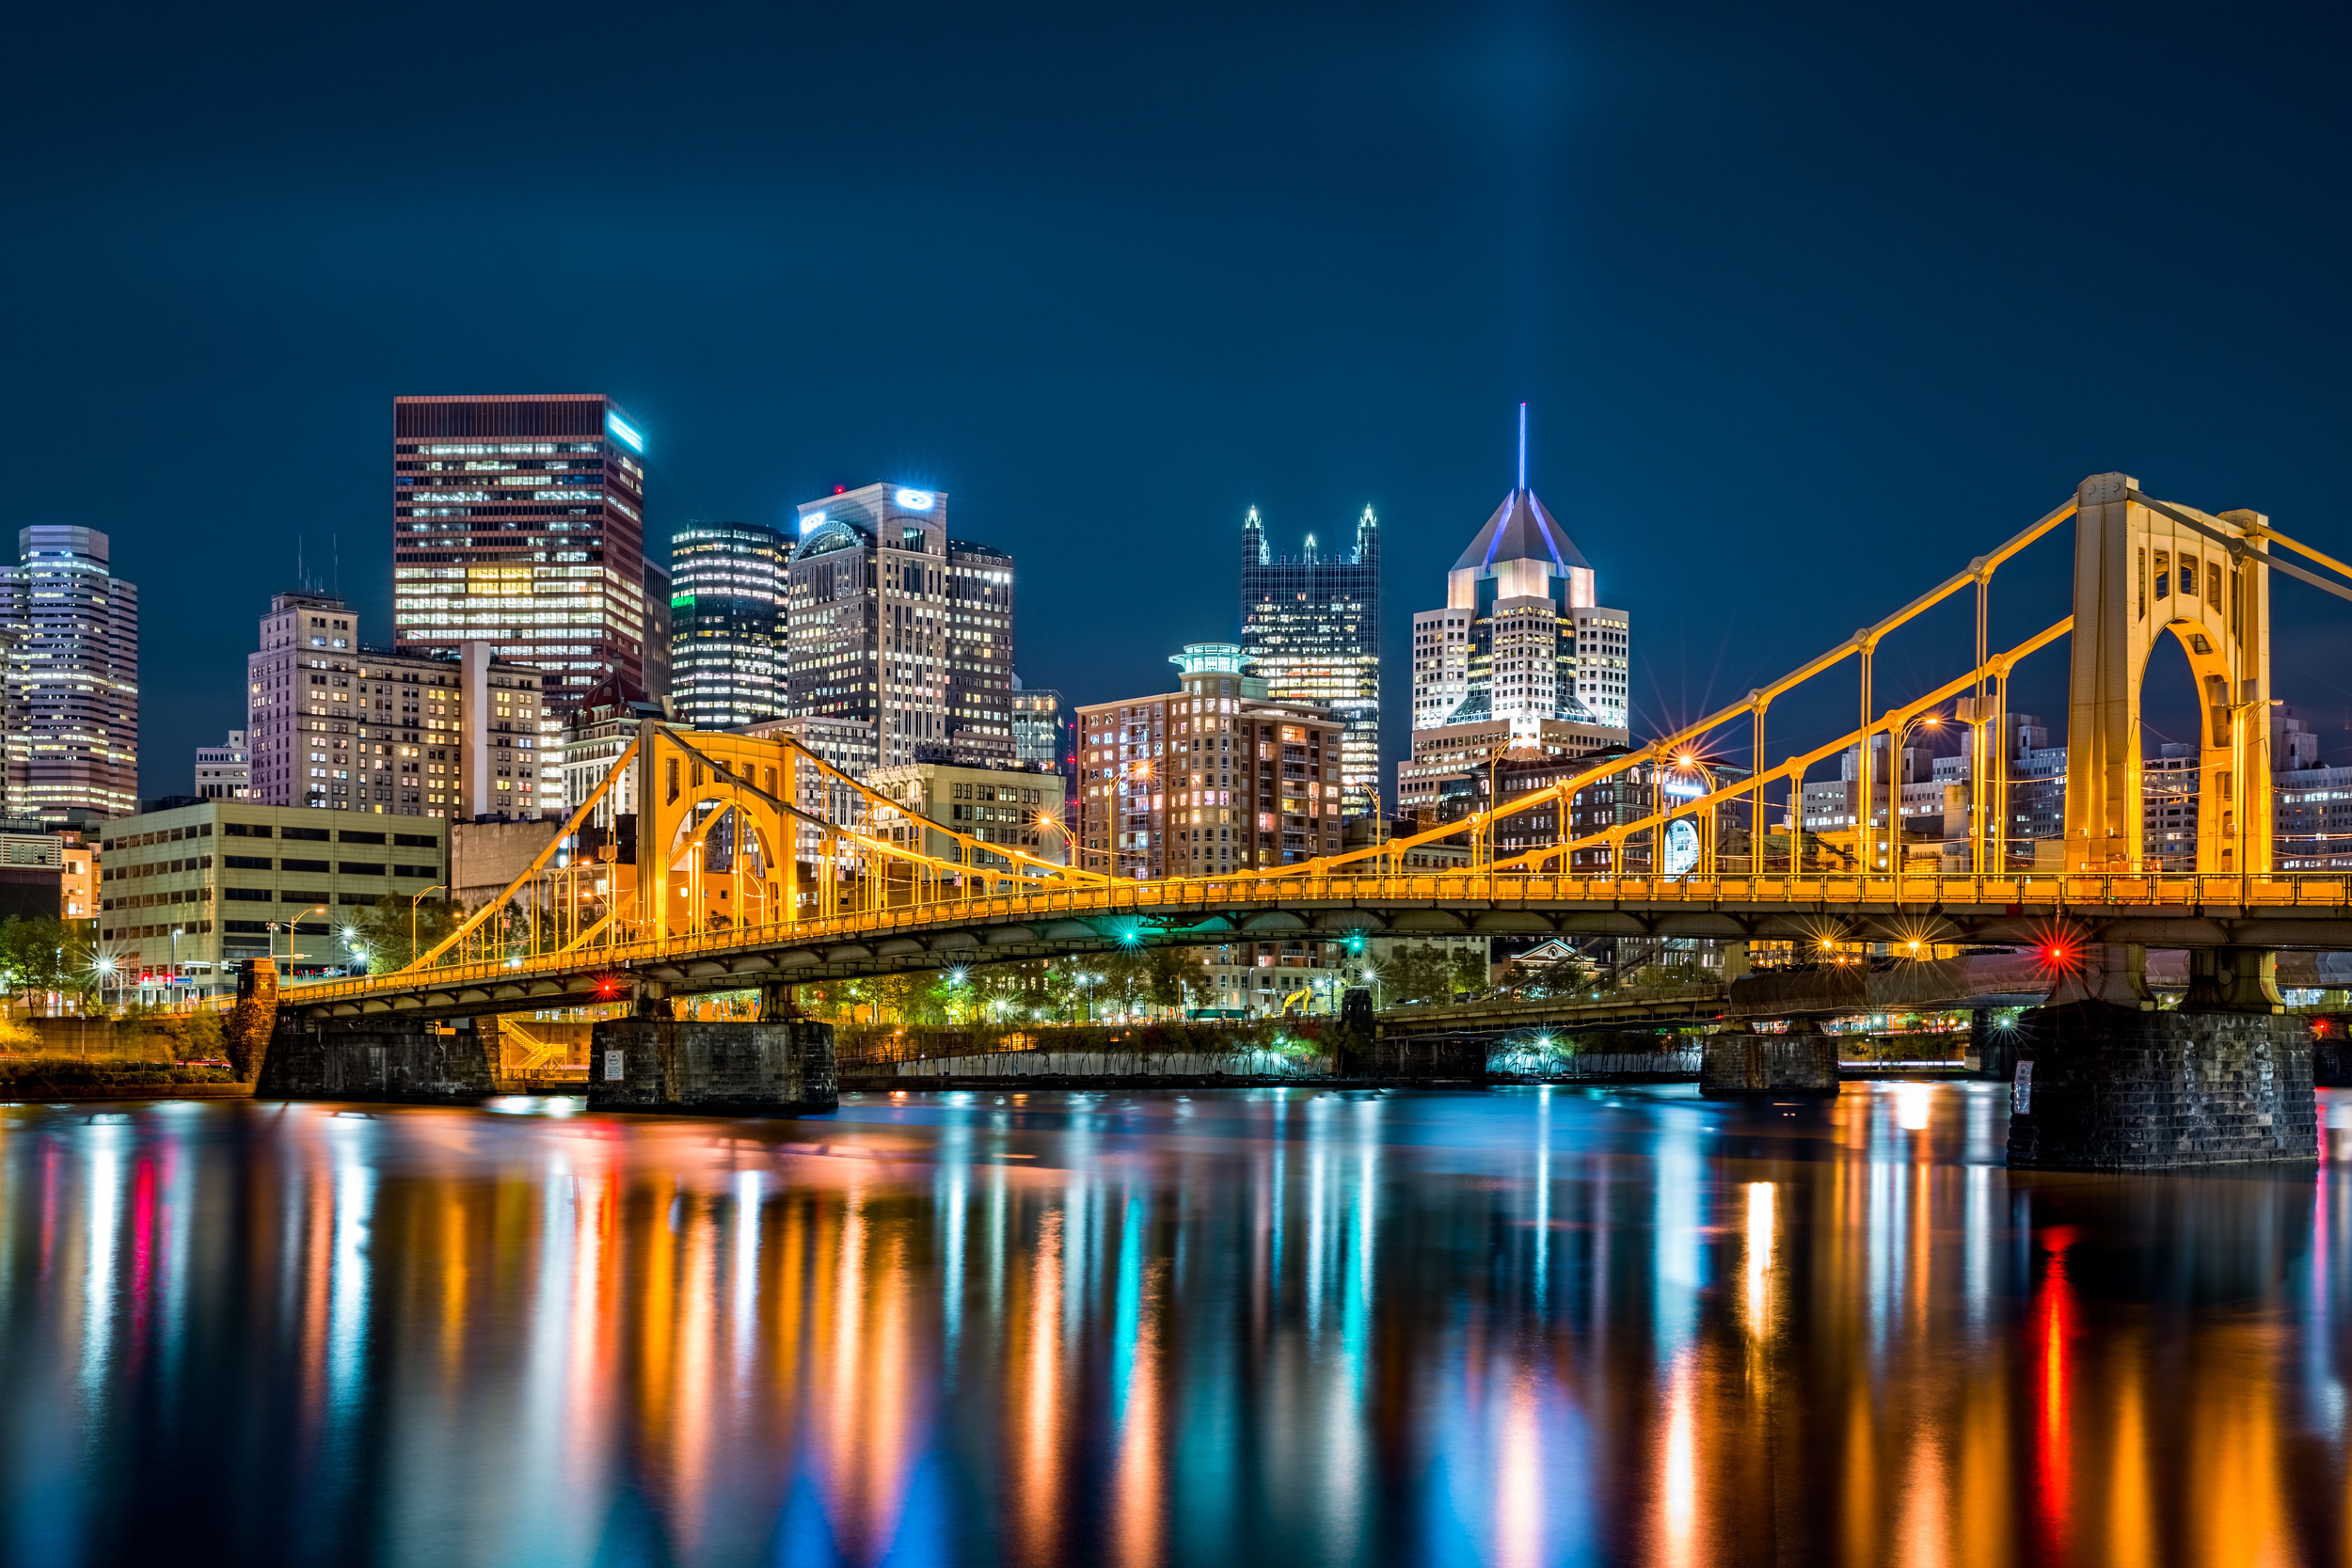 <p>Pittsburgh might surprise you with its nightlife offerings. It has sports bars, casinos, and college bars, but it also has clubs and speakeasies that don’t feel quite so industrial. It's worth a shot. </p><p>You may also like: <a href='https://www.yardbarker.com/lifestyle/articles/wine_dine_21_recipes_that_feature_wine_as_an_ingredient/s1__38367016'>Wine & Dine: 21 recipes that feature wine as an ingredient</a></p>